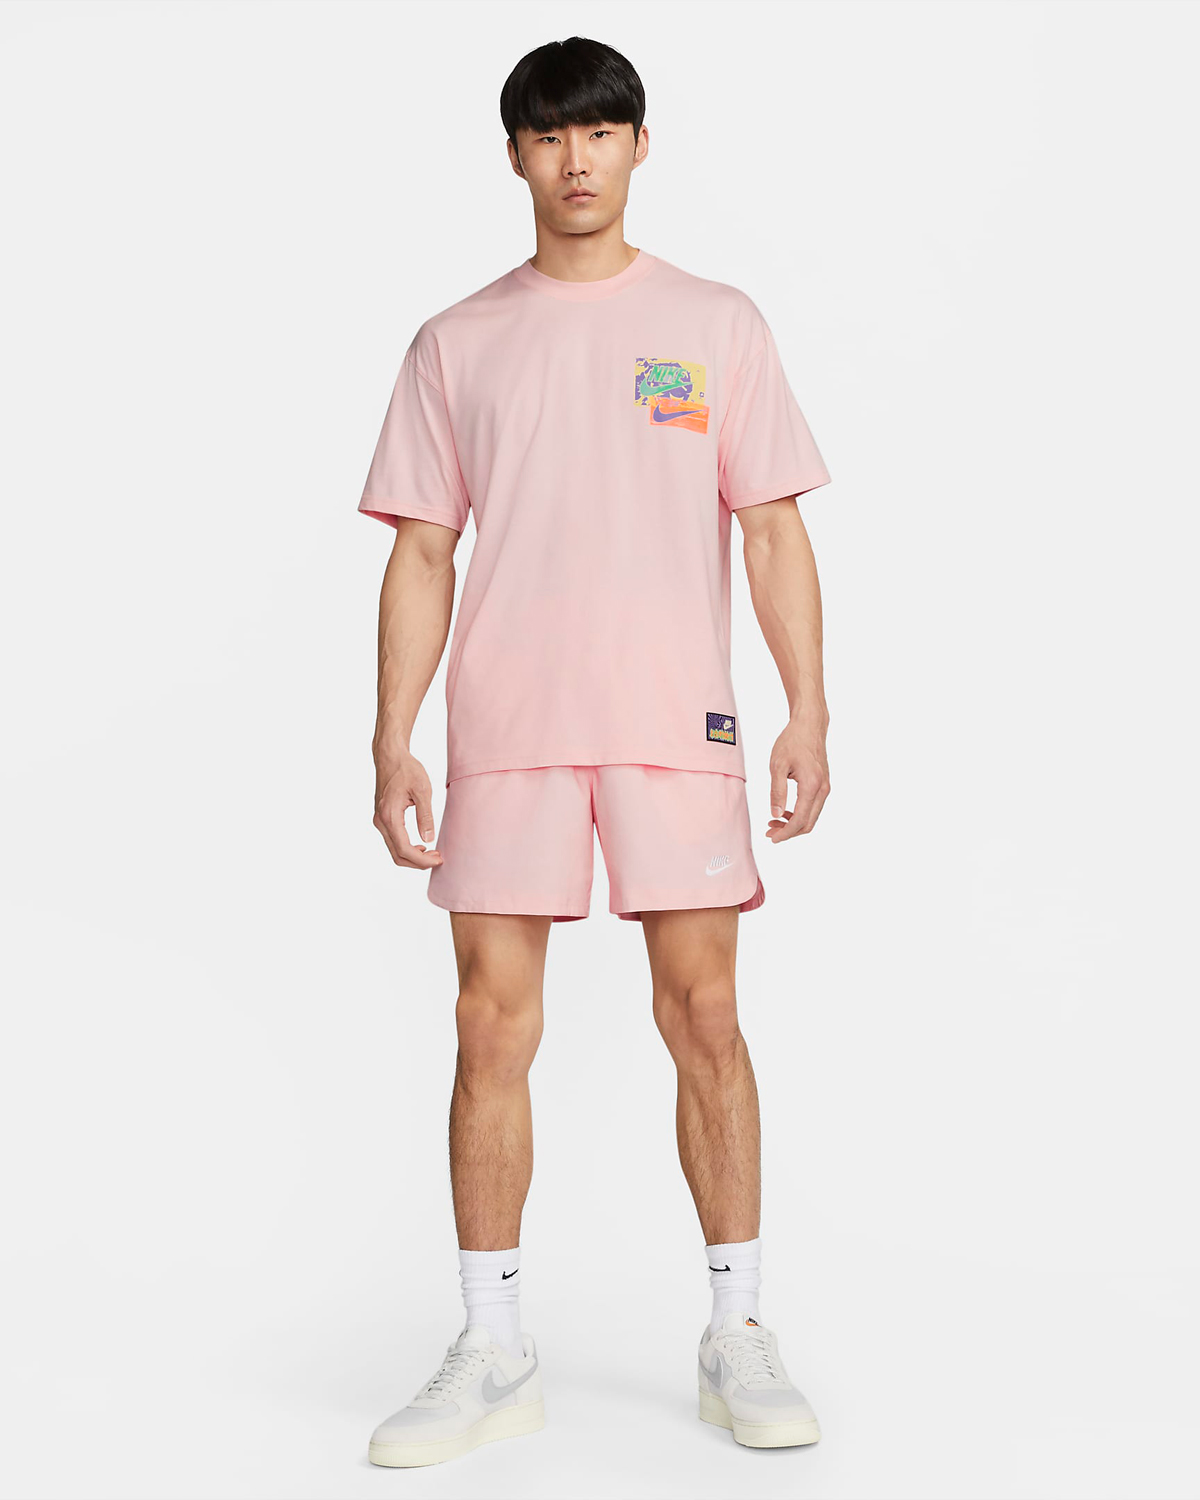 Nike Pink Bloom Shirts Shorts Clothing Sneaker Outfits